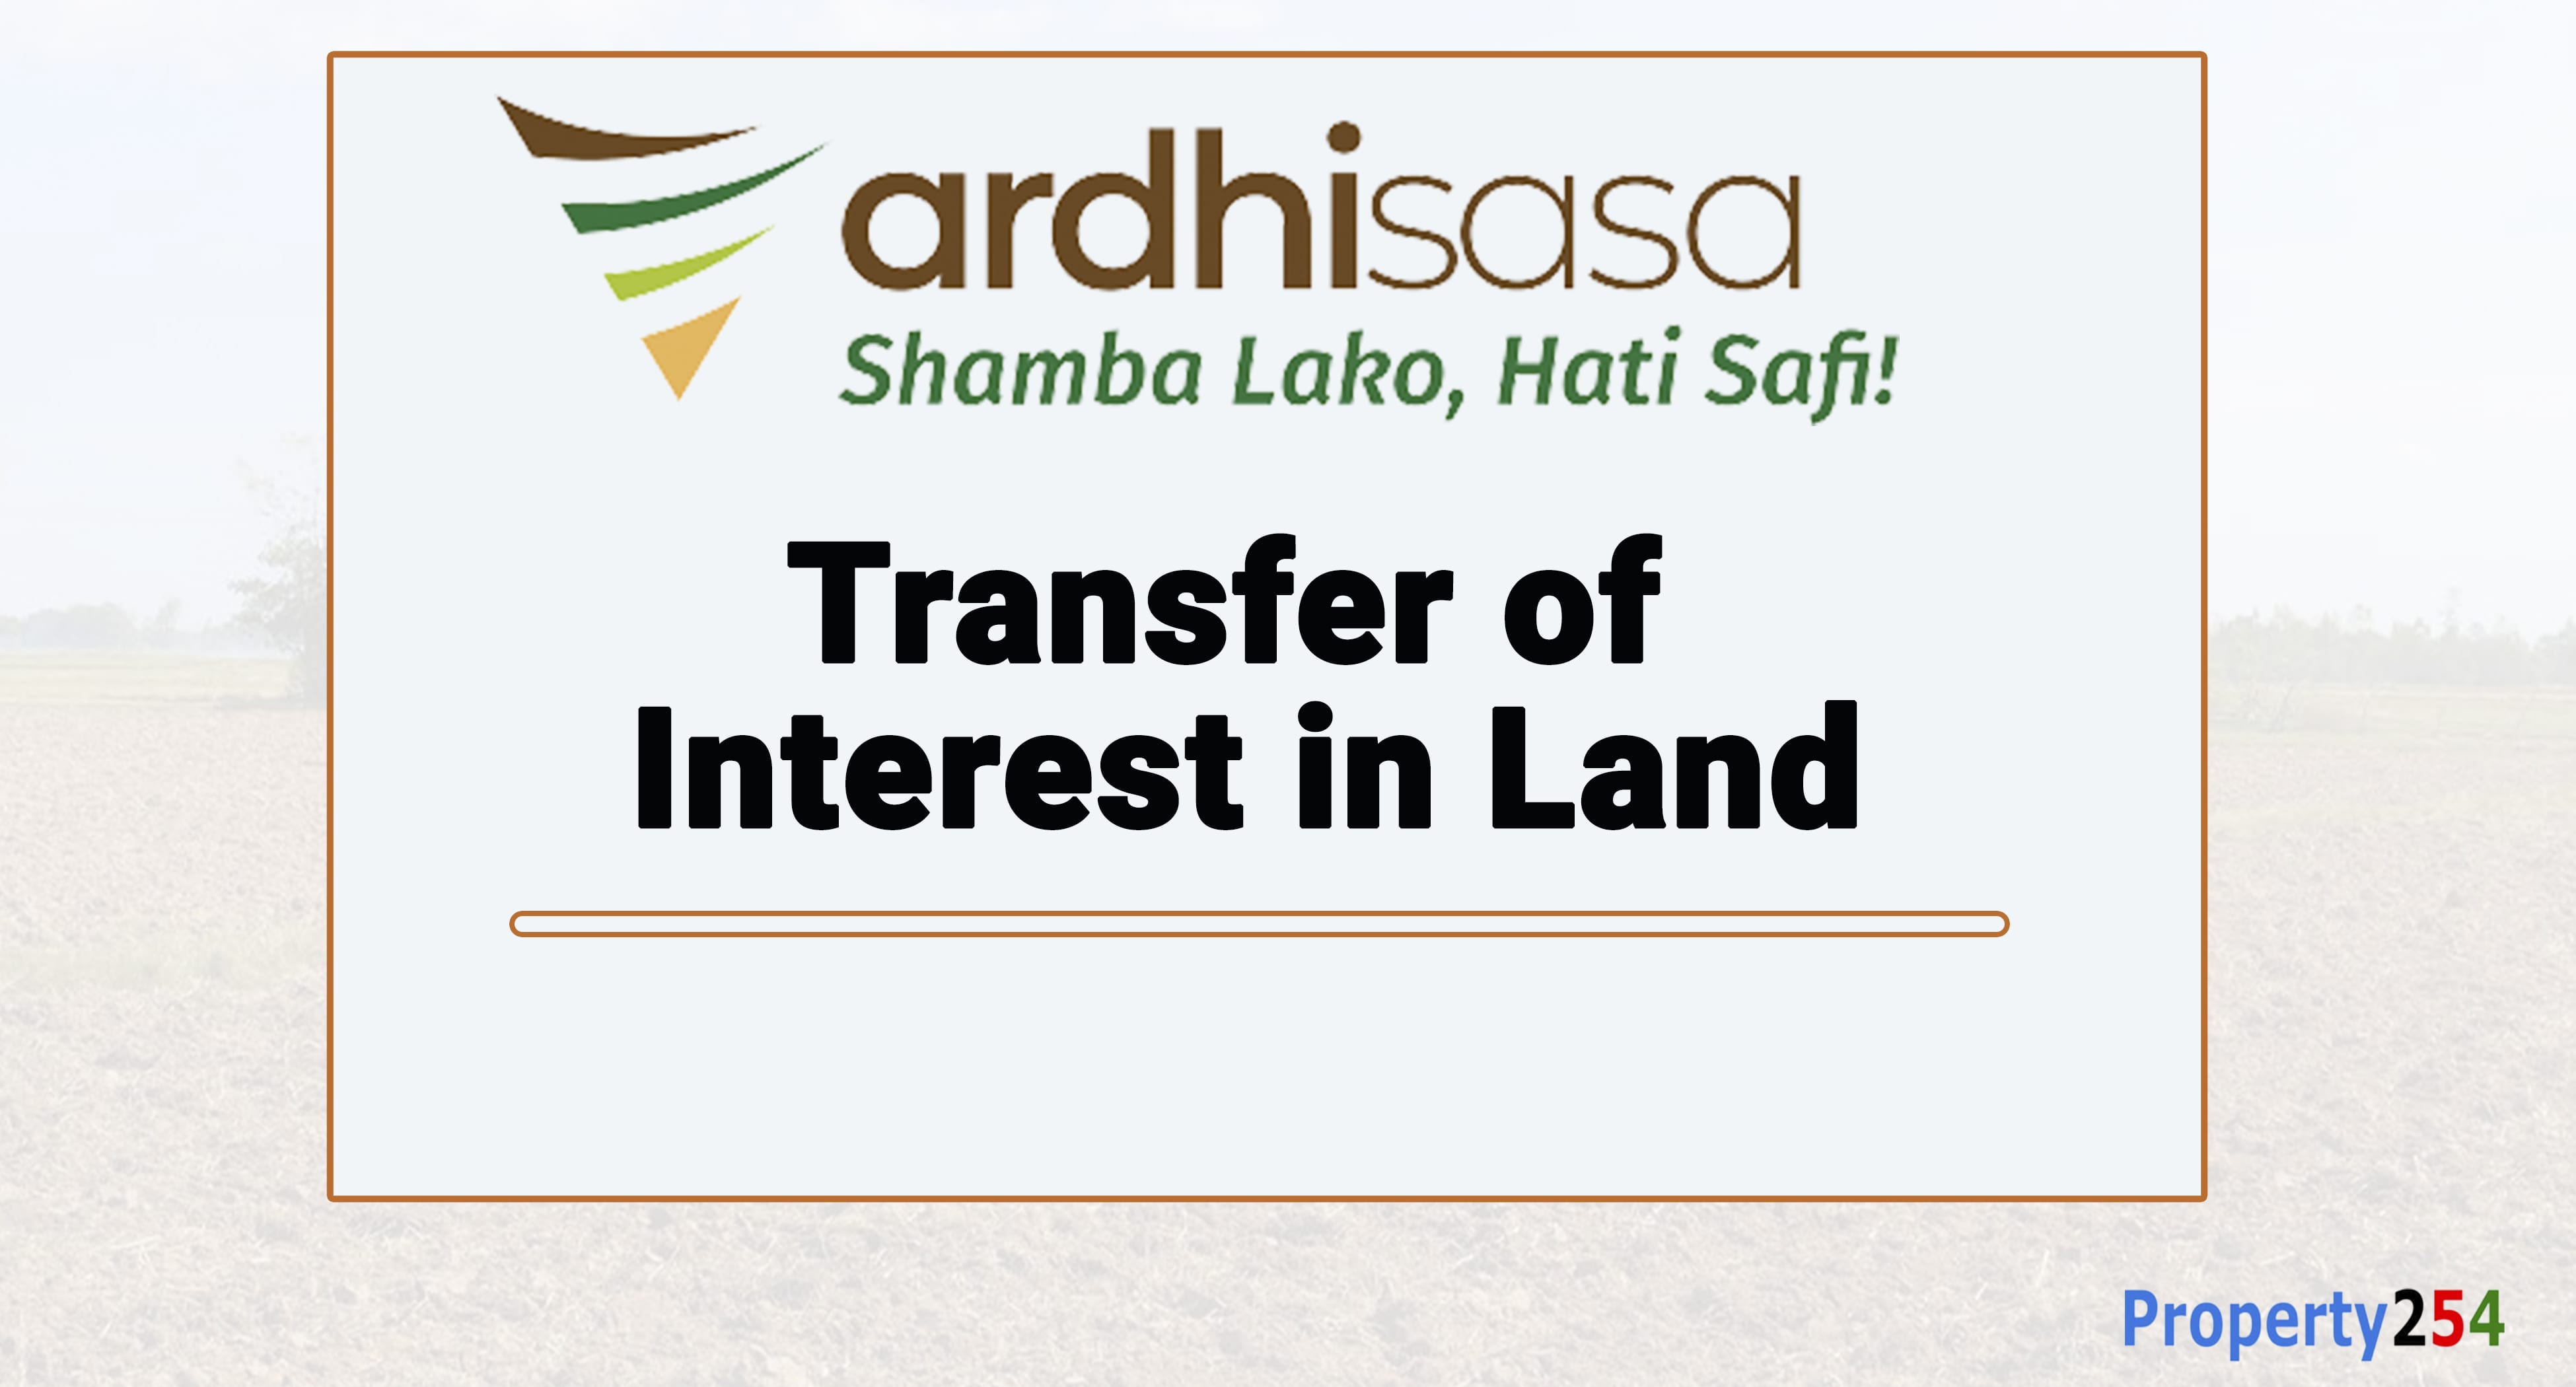 How to Apply for Transfer of Interest in Land on Ardhisasa thumbnail